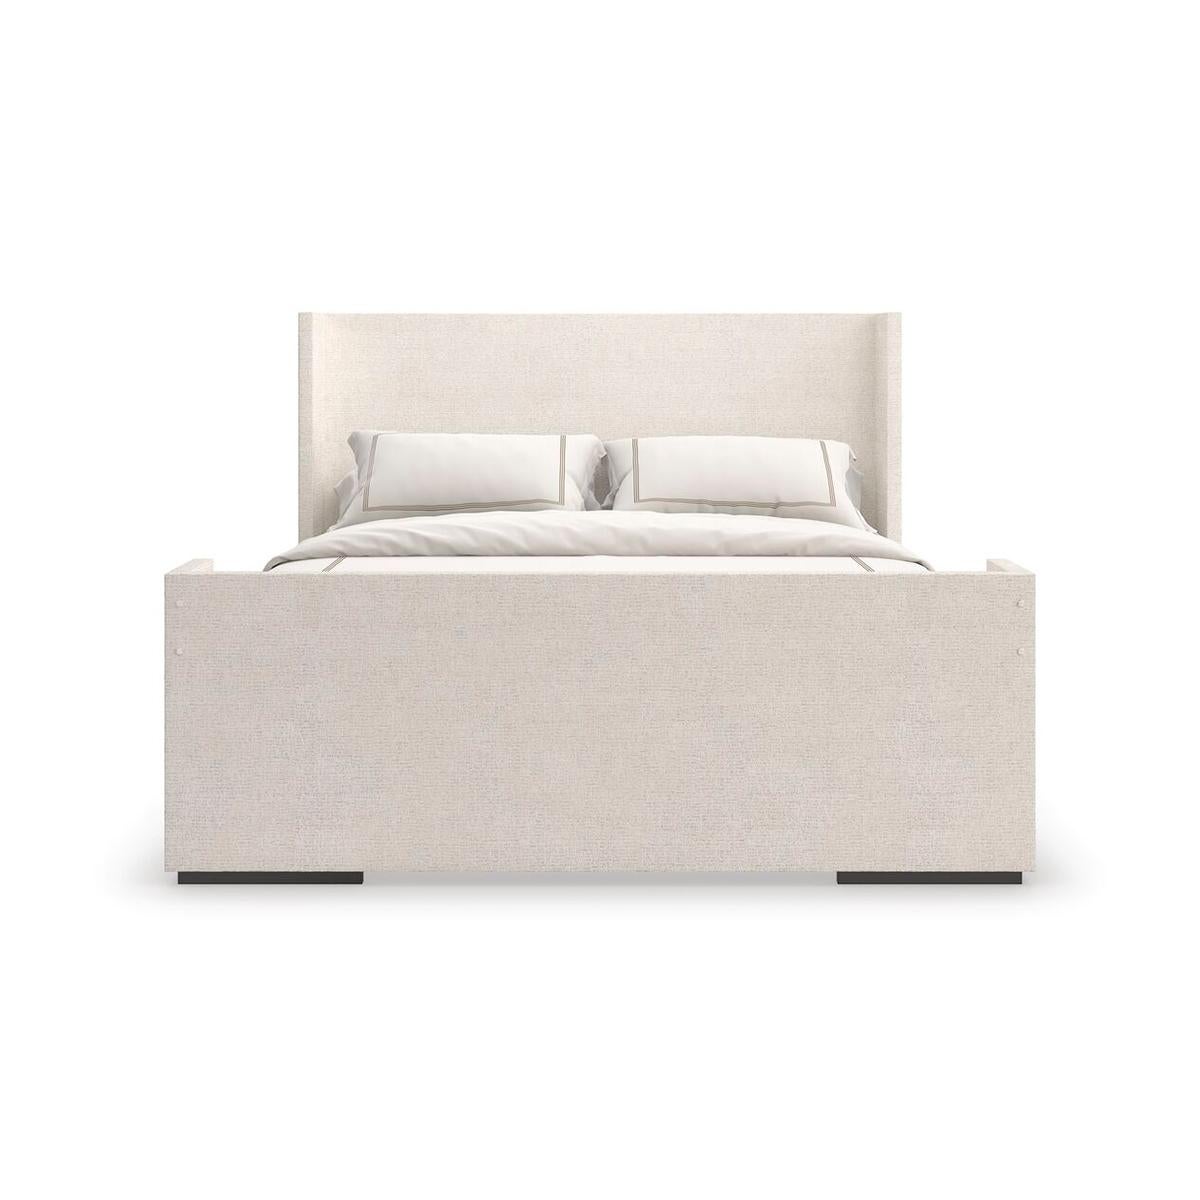 Dressed in a soft chenille fabric, this king bed brings an air of effortless elegance and enveloping comfort. Its simple, geometric form and soothing neutral hue blend beautifully with classic or modern design aesthetics.

Raised on contrasting feet